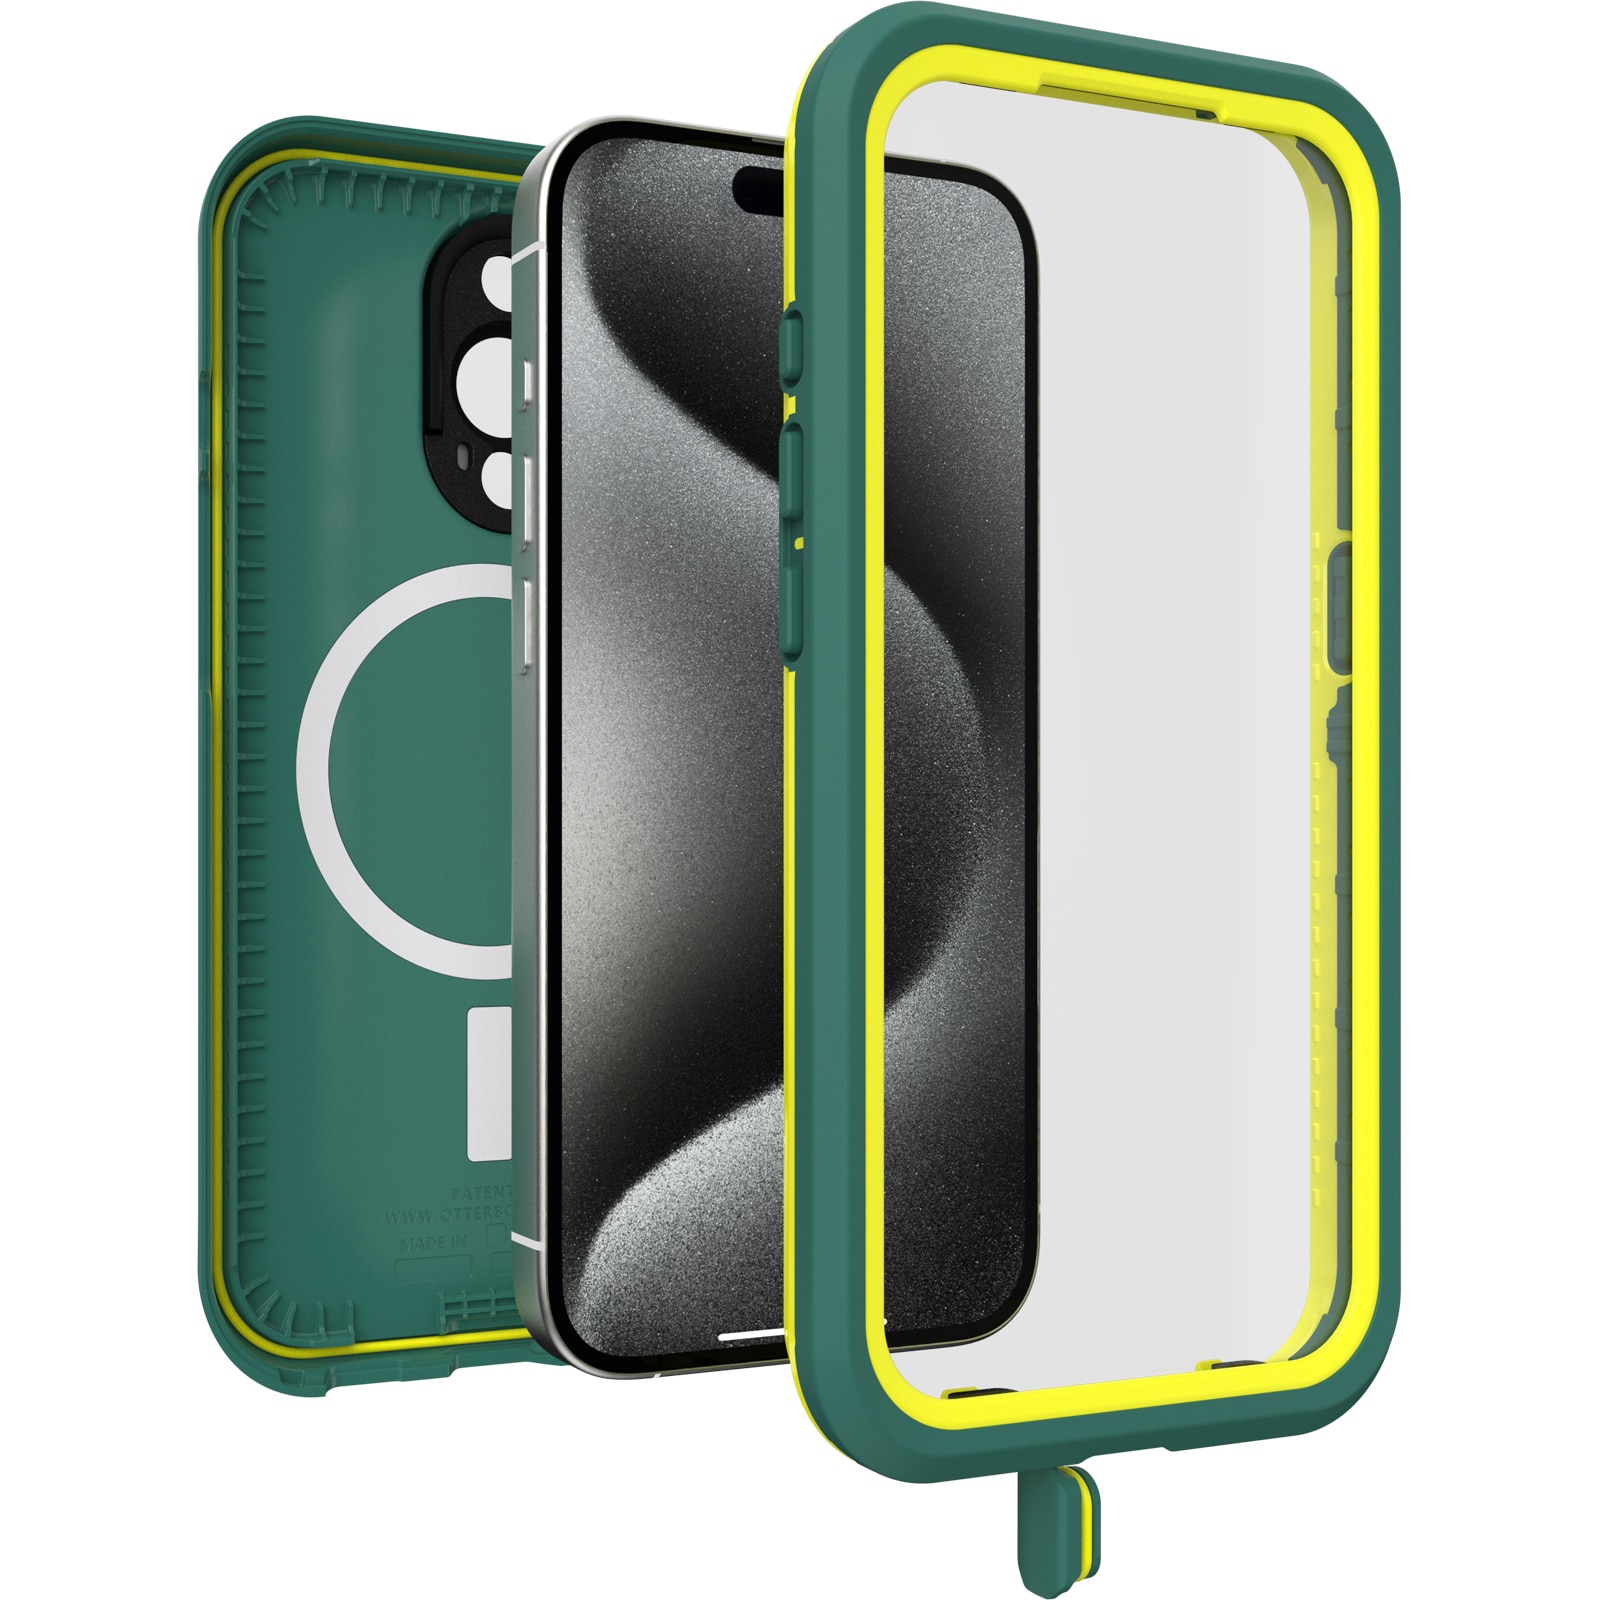 FRE MagSafe Cover iPhone 15 Pro Green